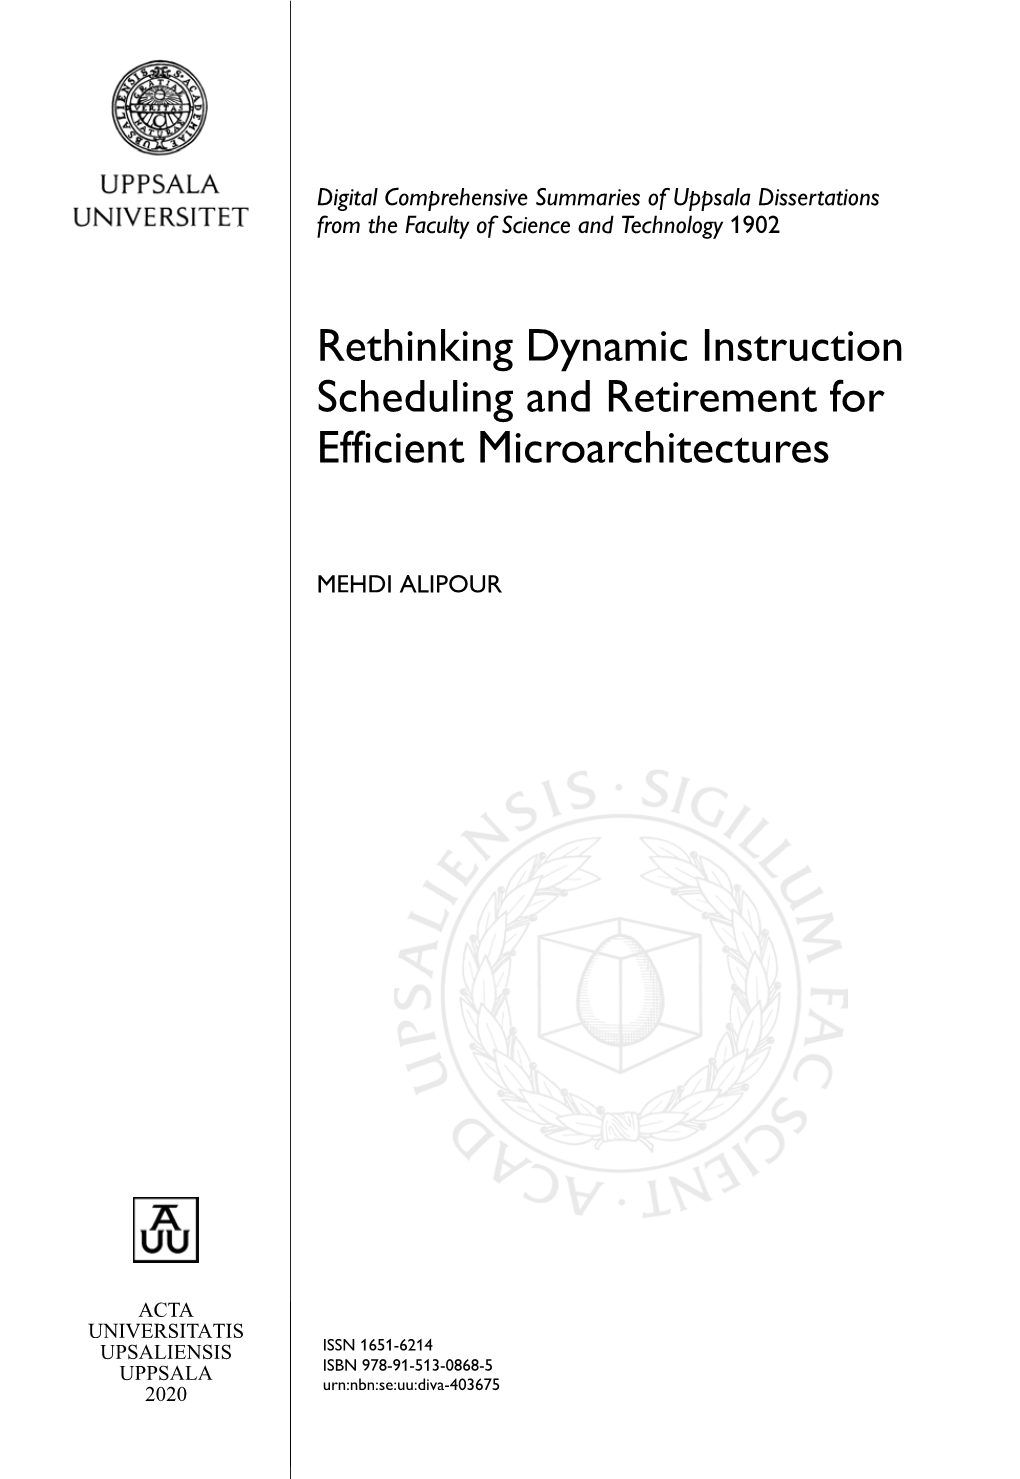 Rethinking Dynamic Instruction Scheduling and Retirement for Efficient Microarchitectures